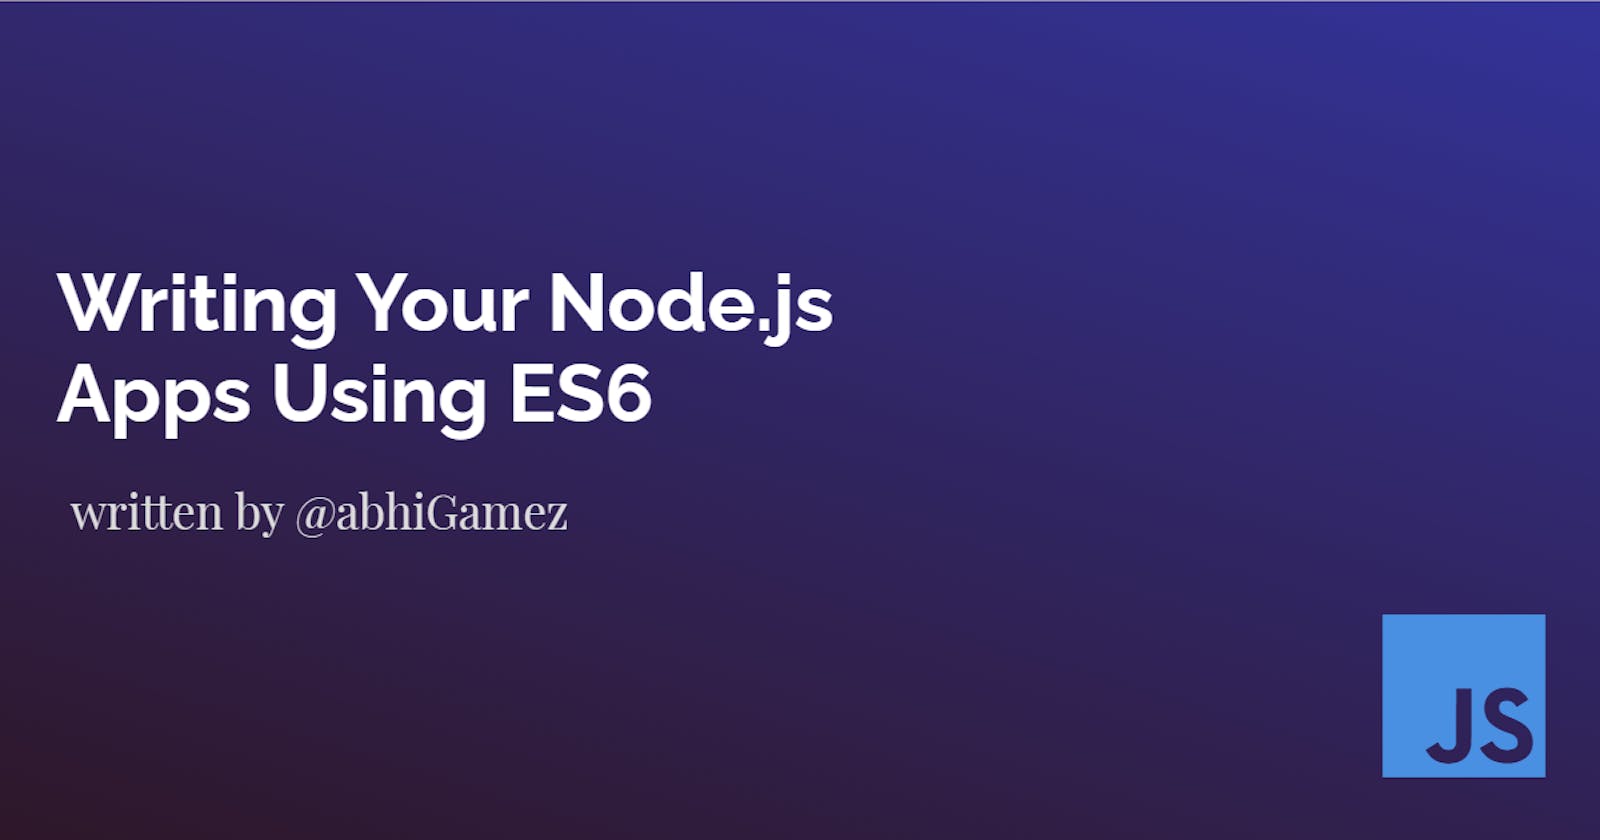 Writing Your Node.js Apps Using ES6